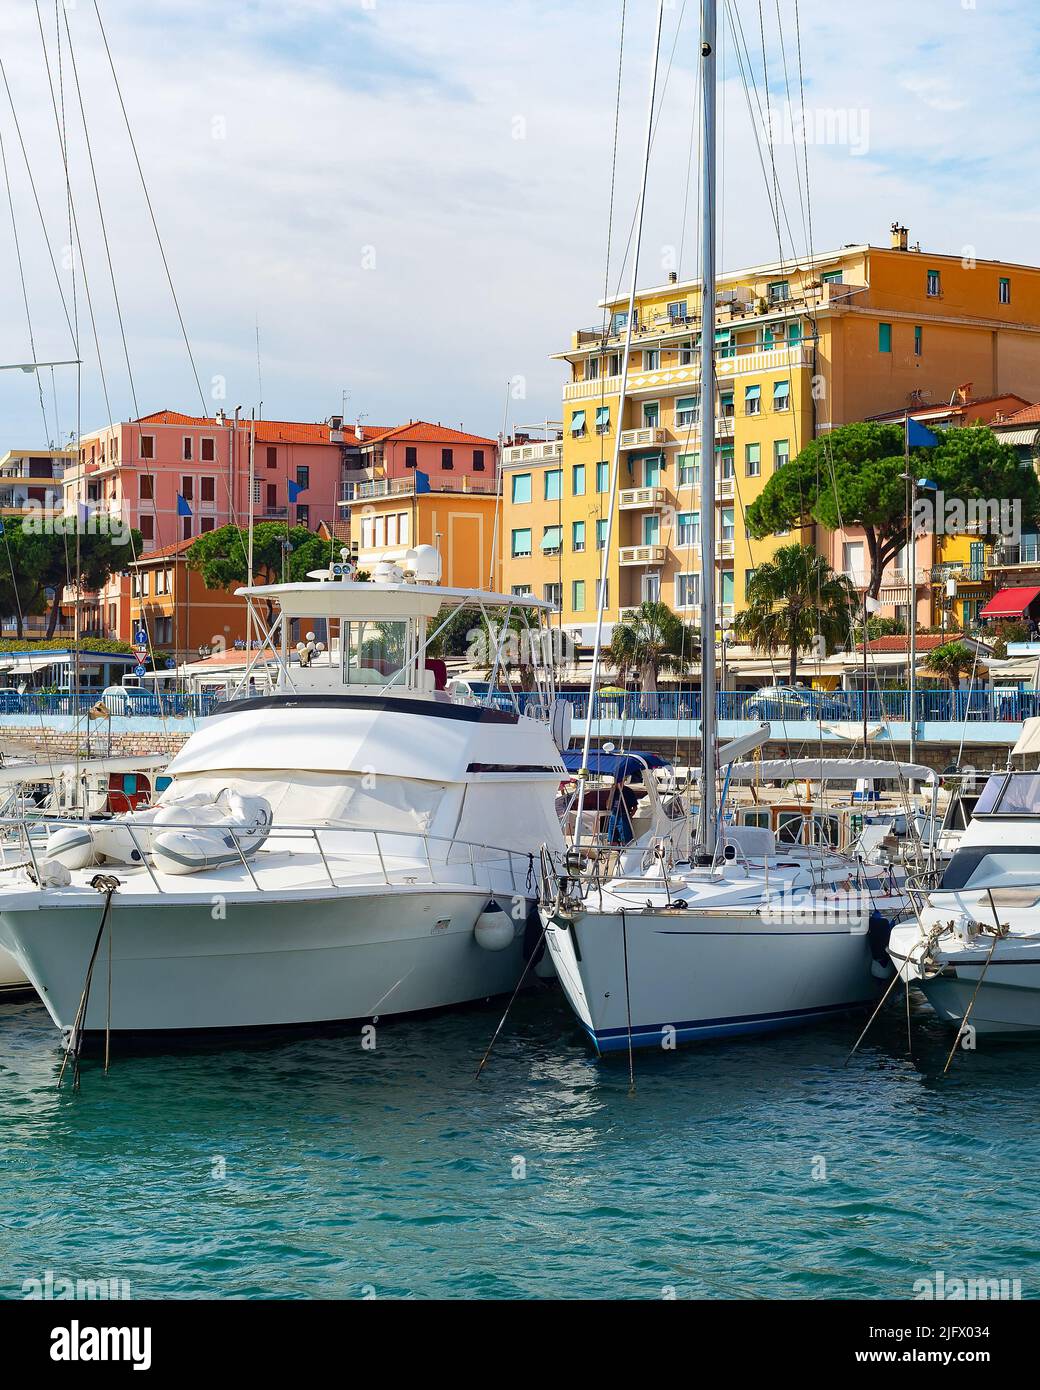 Marina with yachts in bright sunhine, cityscape in background, Sanremo, Itlay Stock Photo